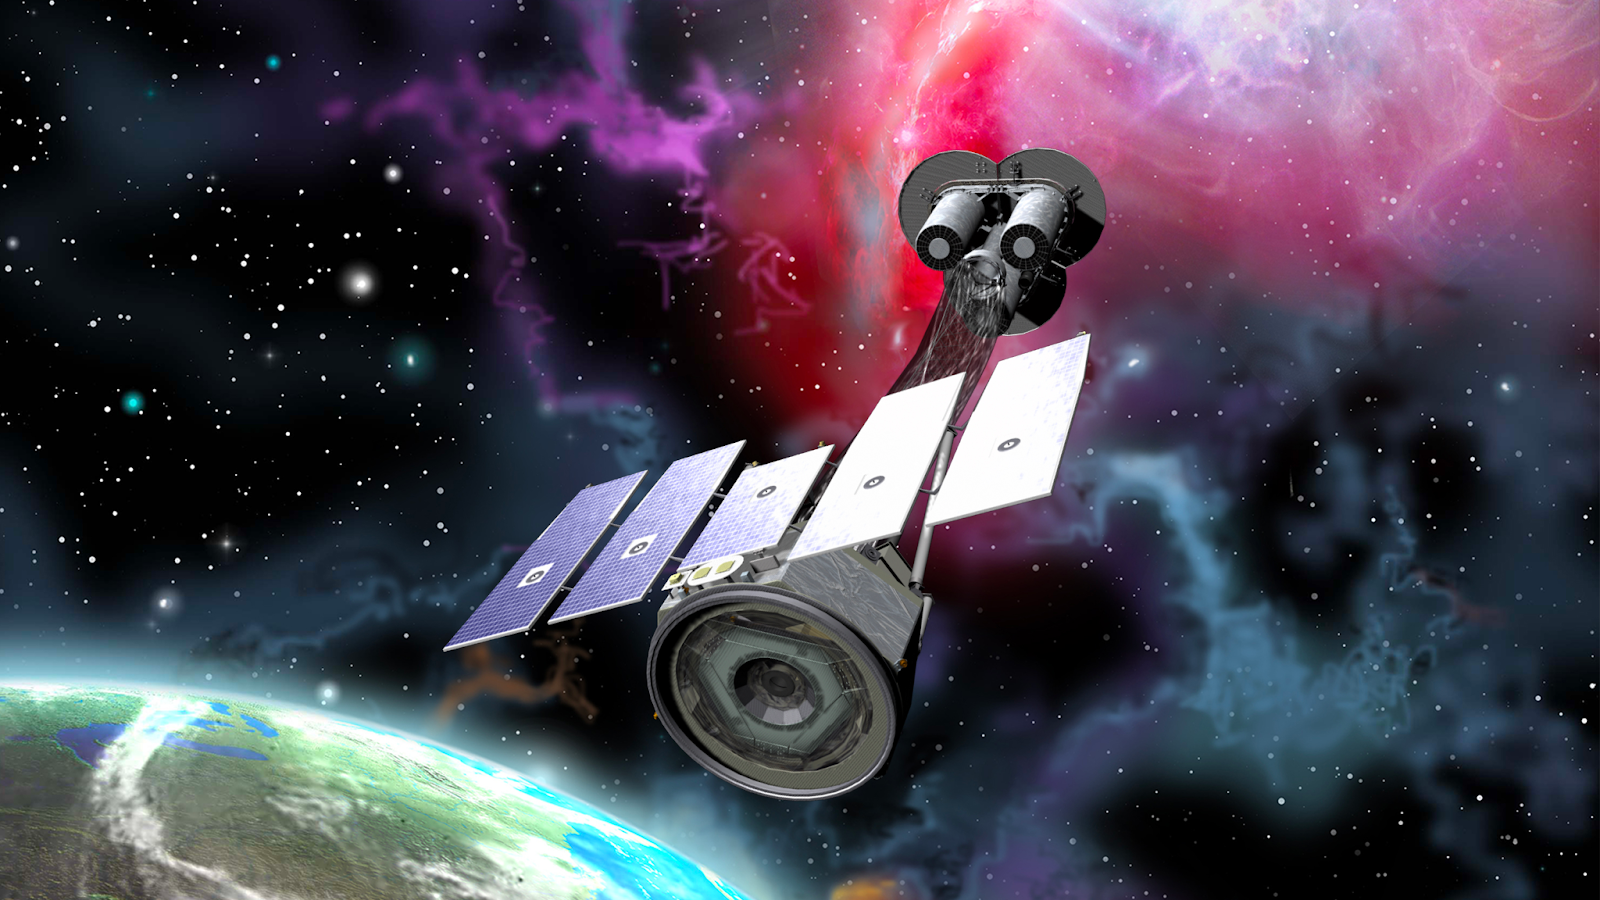 An example of one of NASA's Explorer-class missions: IXPE, the Imaging X-ray Polarimetry Explorer, recently launched in December 2021. Image Credits: NASA